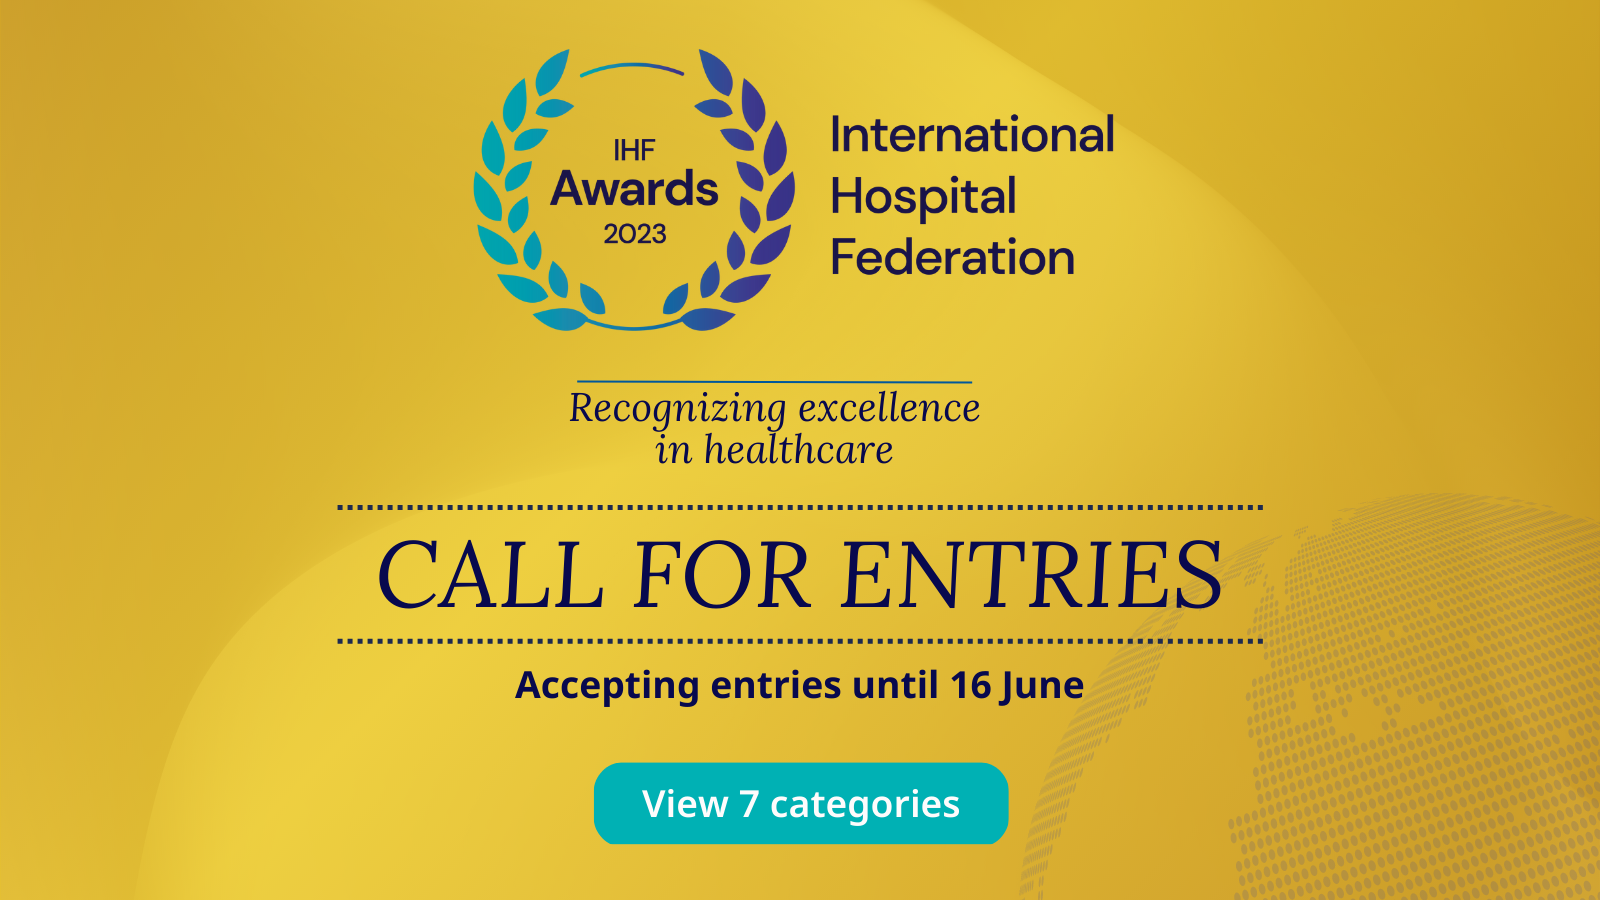 IHF Awards 2023 (1600 × 900 px).png